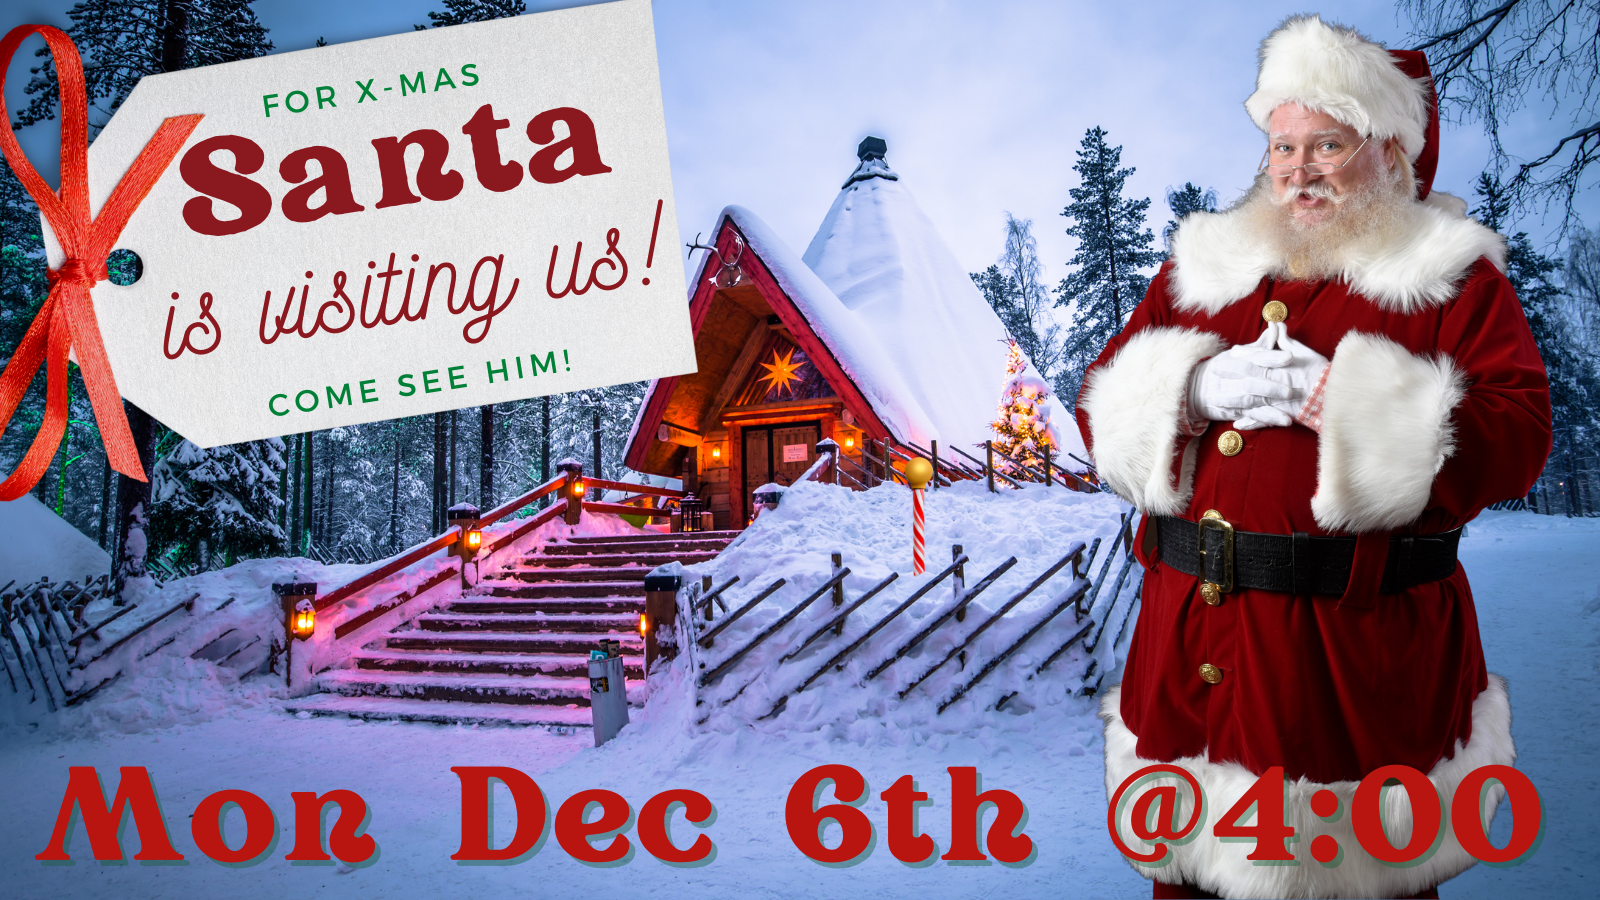 The Real Santa at the North Pole, with a gift tag stating "Santa is Visiting us" followed by bottom text with the date (Mon Dec 6th @4:00pm)